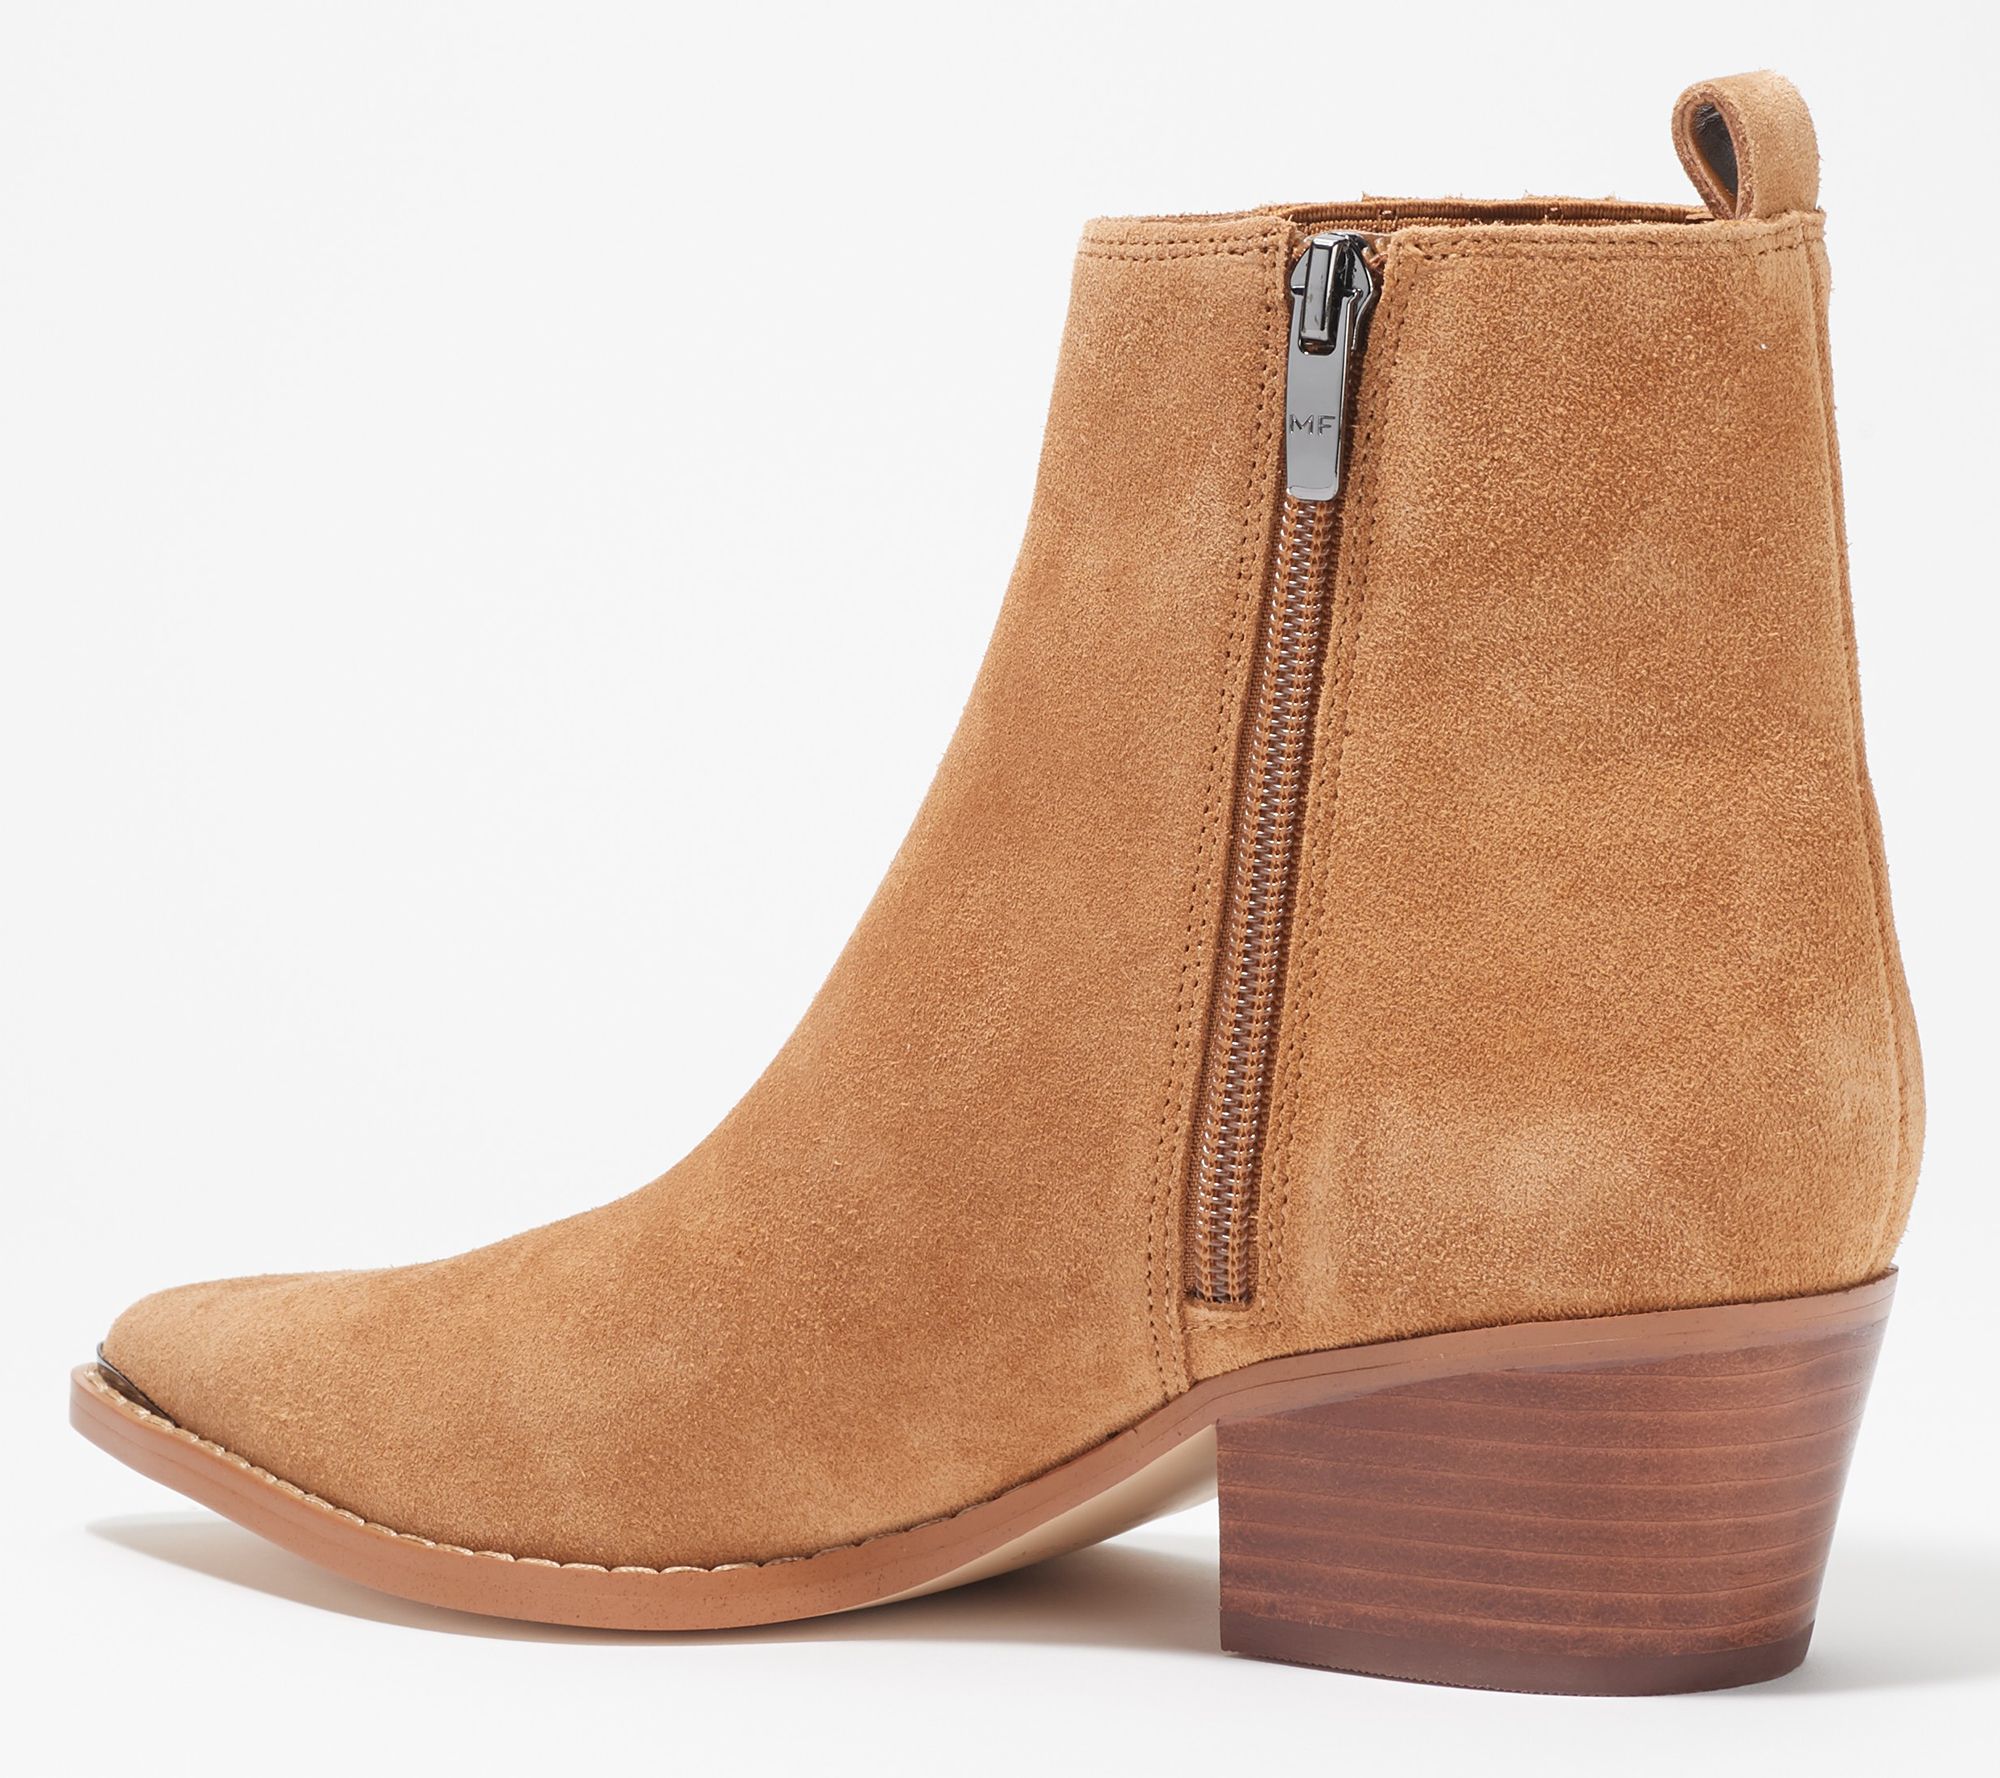 Marc Fisher Pointed Ankle Boots - Ulora - QVC.com